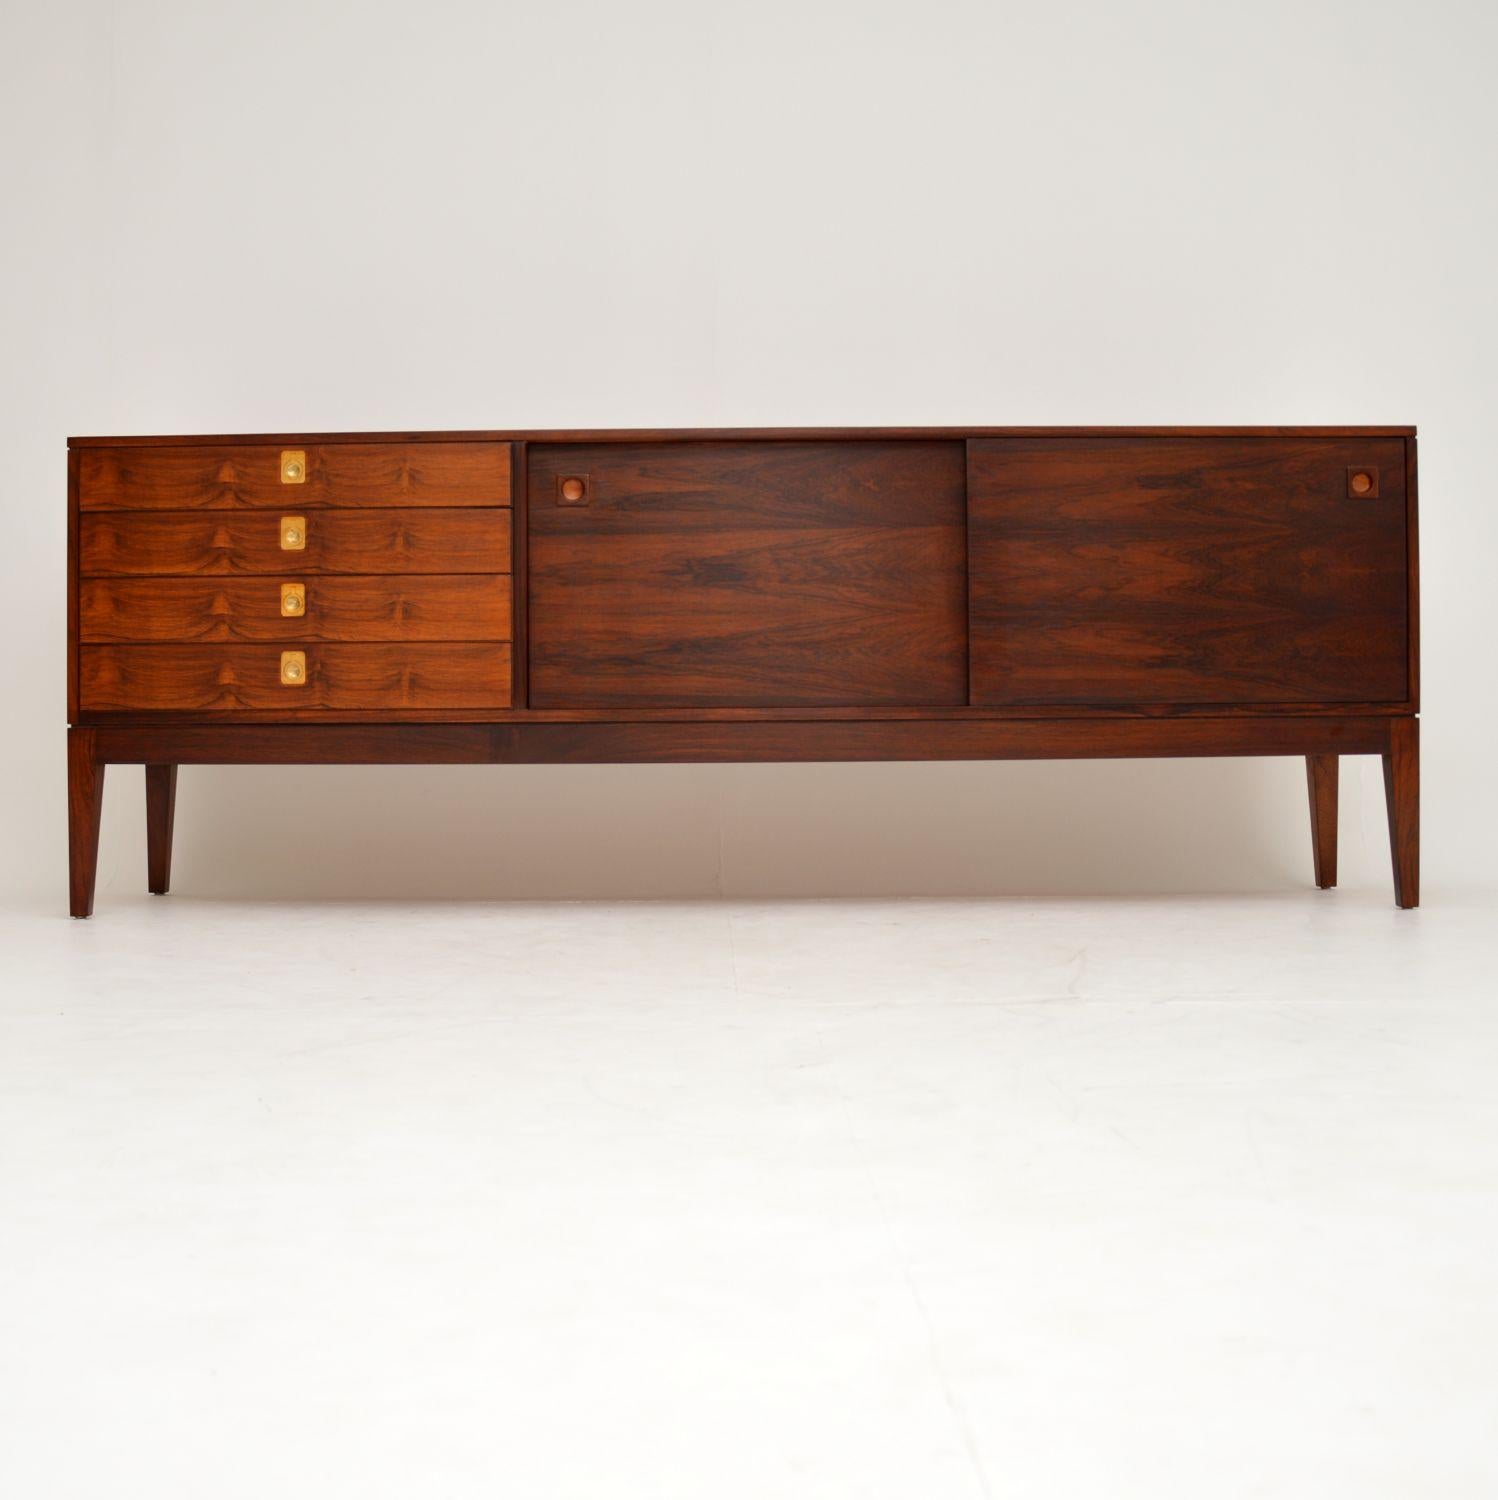 A magnificent vintage sideboard, designed by Robert Heritage for Archie Shine. This dates from the 1960s, it is in superb condition throughout. We have had it stripped and re-polished to a very high standard. The wood grain patterns and color are